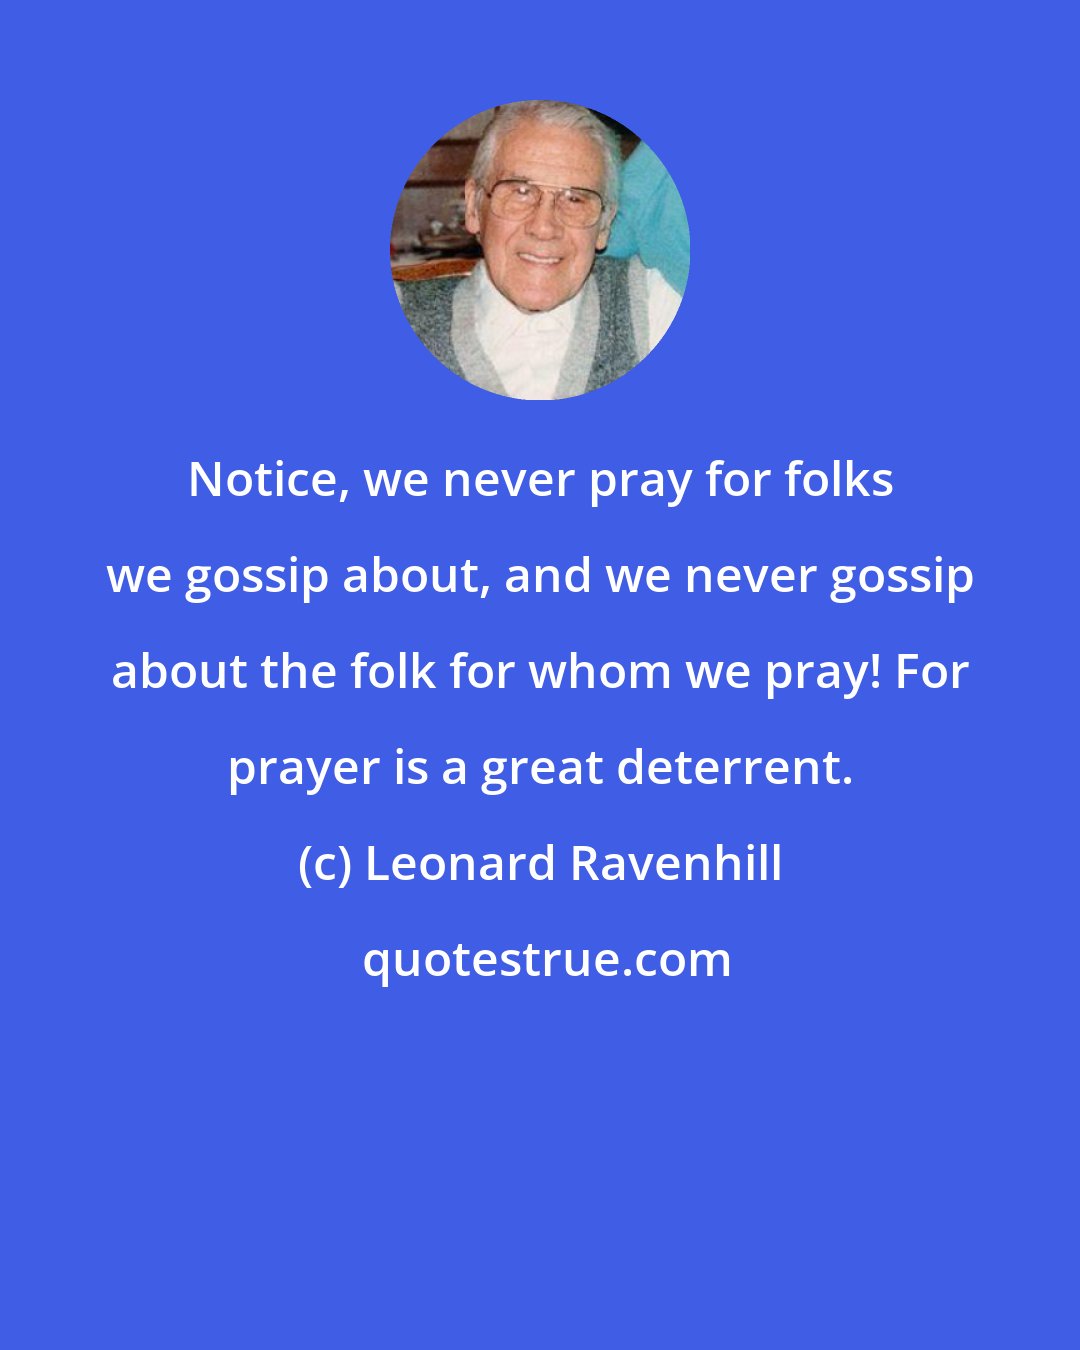 Leonard Ravenhill: Notice, we never pray for folks we gossip about, and we never gossip about the folk for whom we pray! For prayer is a great deterrent.